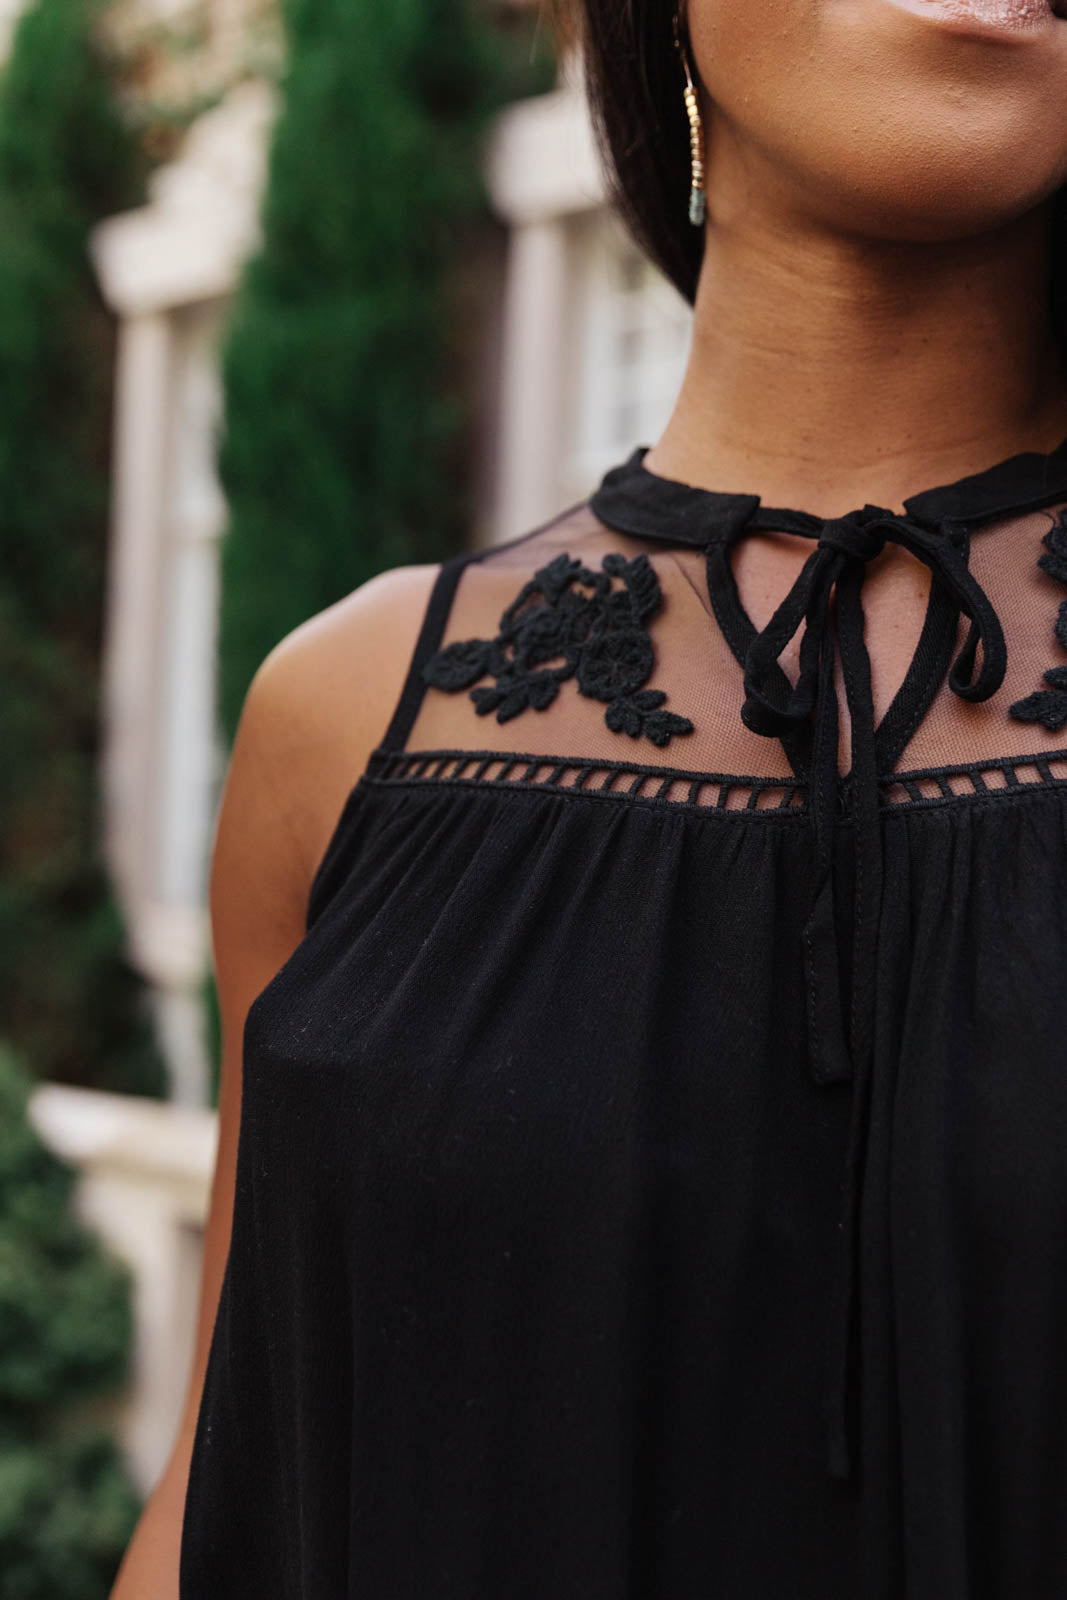 Romance in the Air Embroidered Top in Black